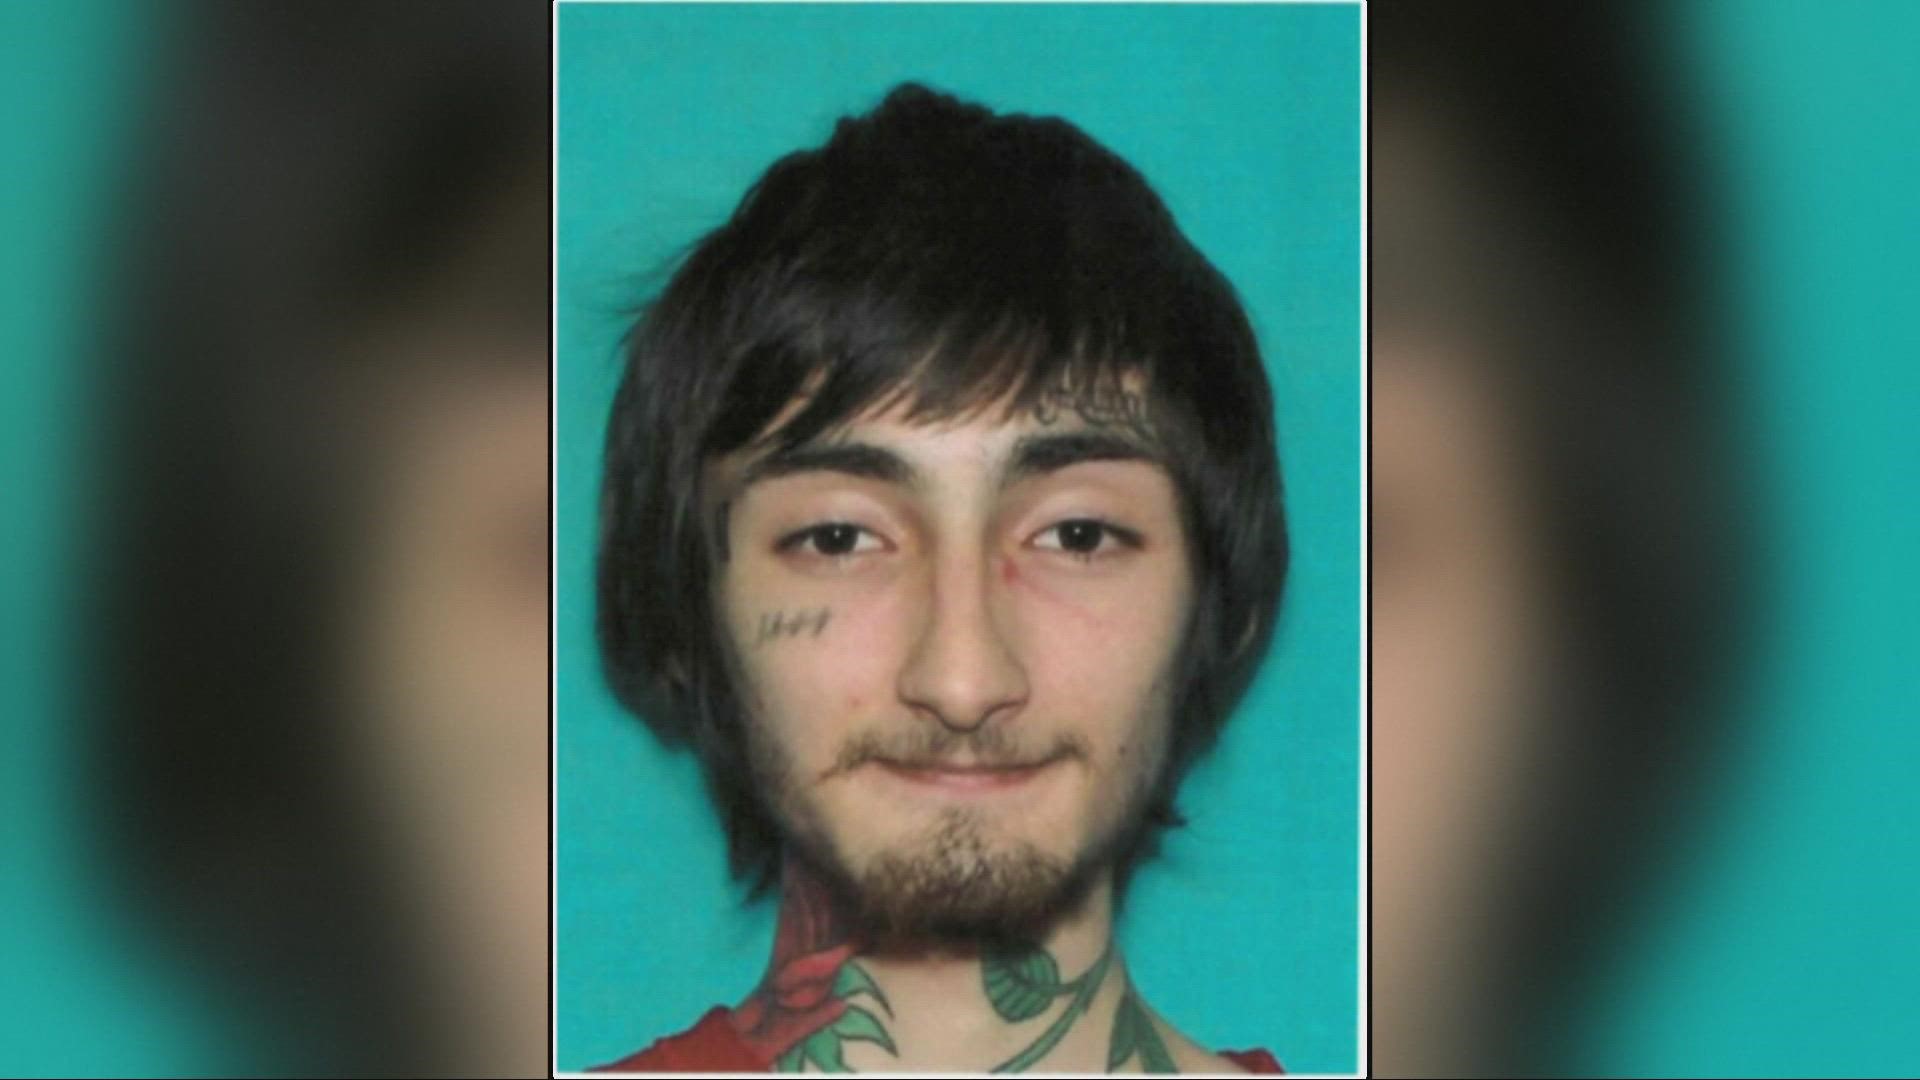 Authorities have identified Robert (Bobby) E. Crimo III as a person of interest in the mass shooting at a Fourth of July parade in a Chicago suburb Monday.